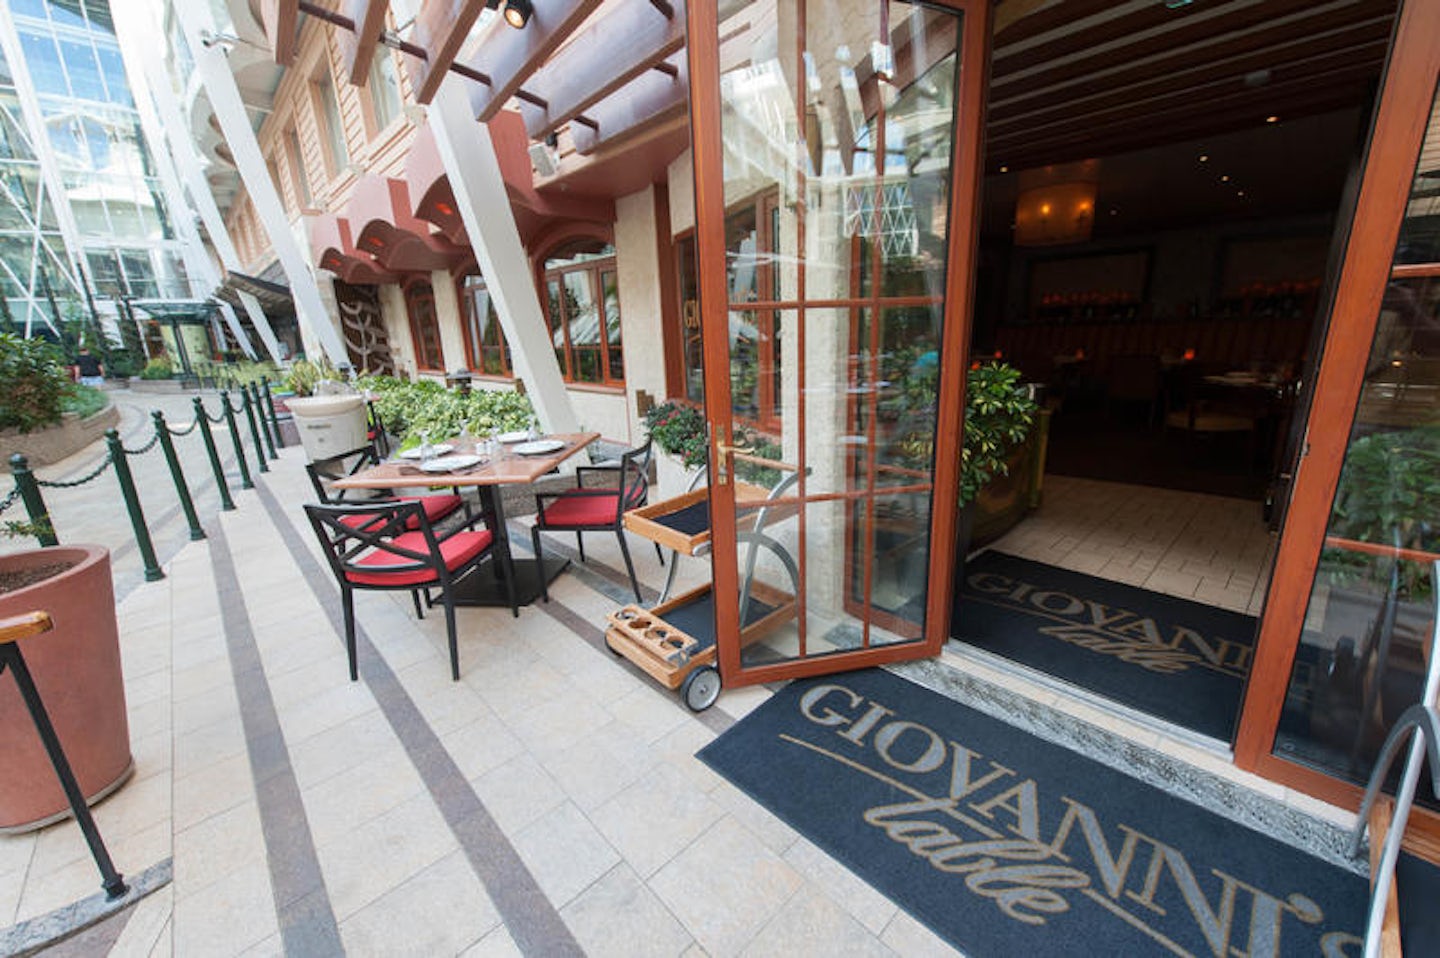 Giovanni's Table on Allure of the Seas